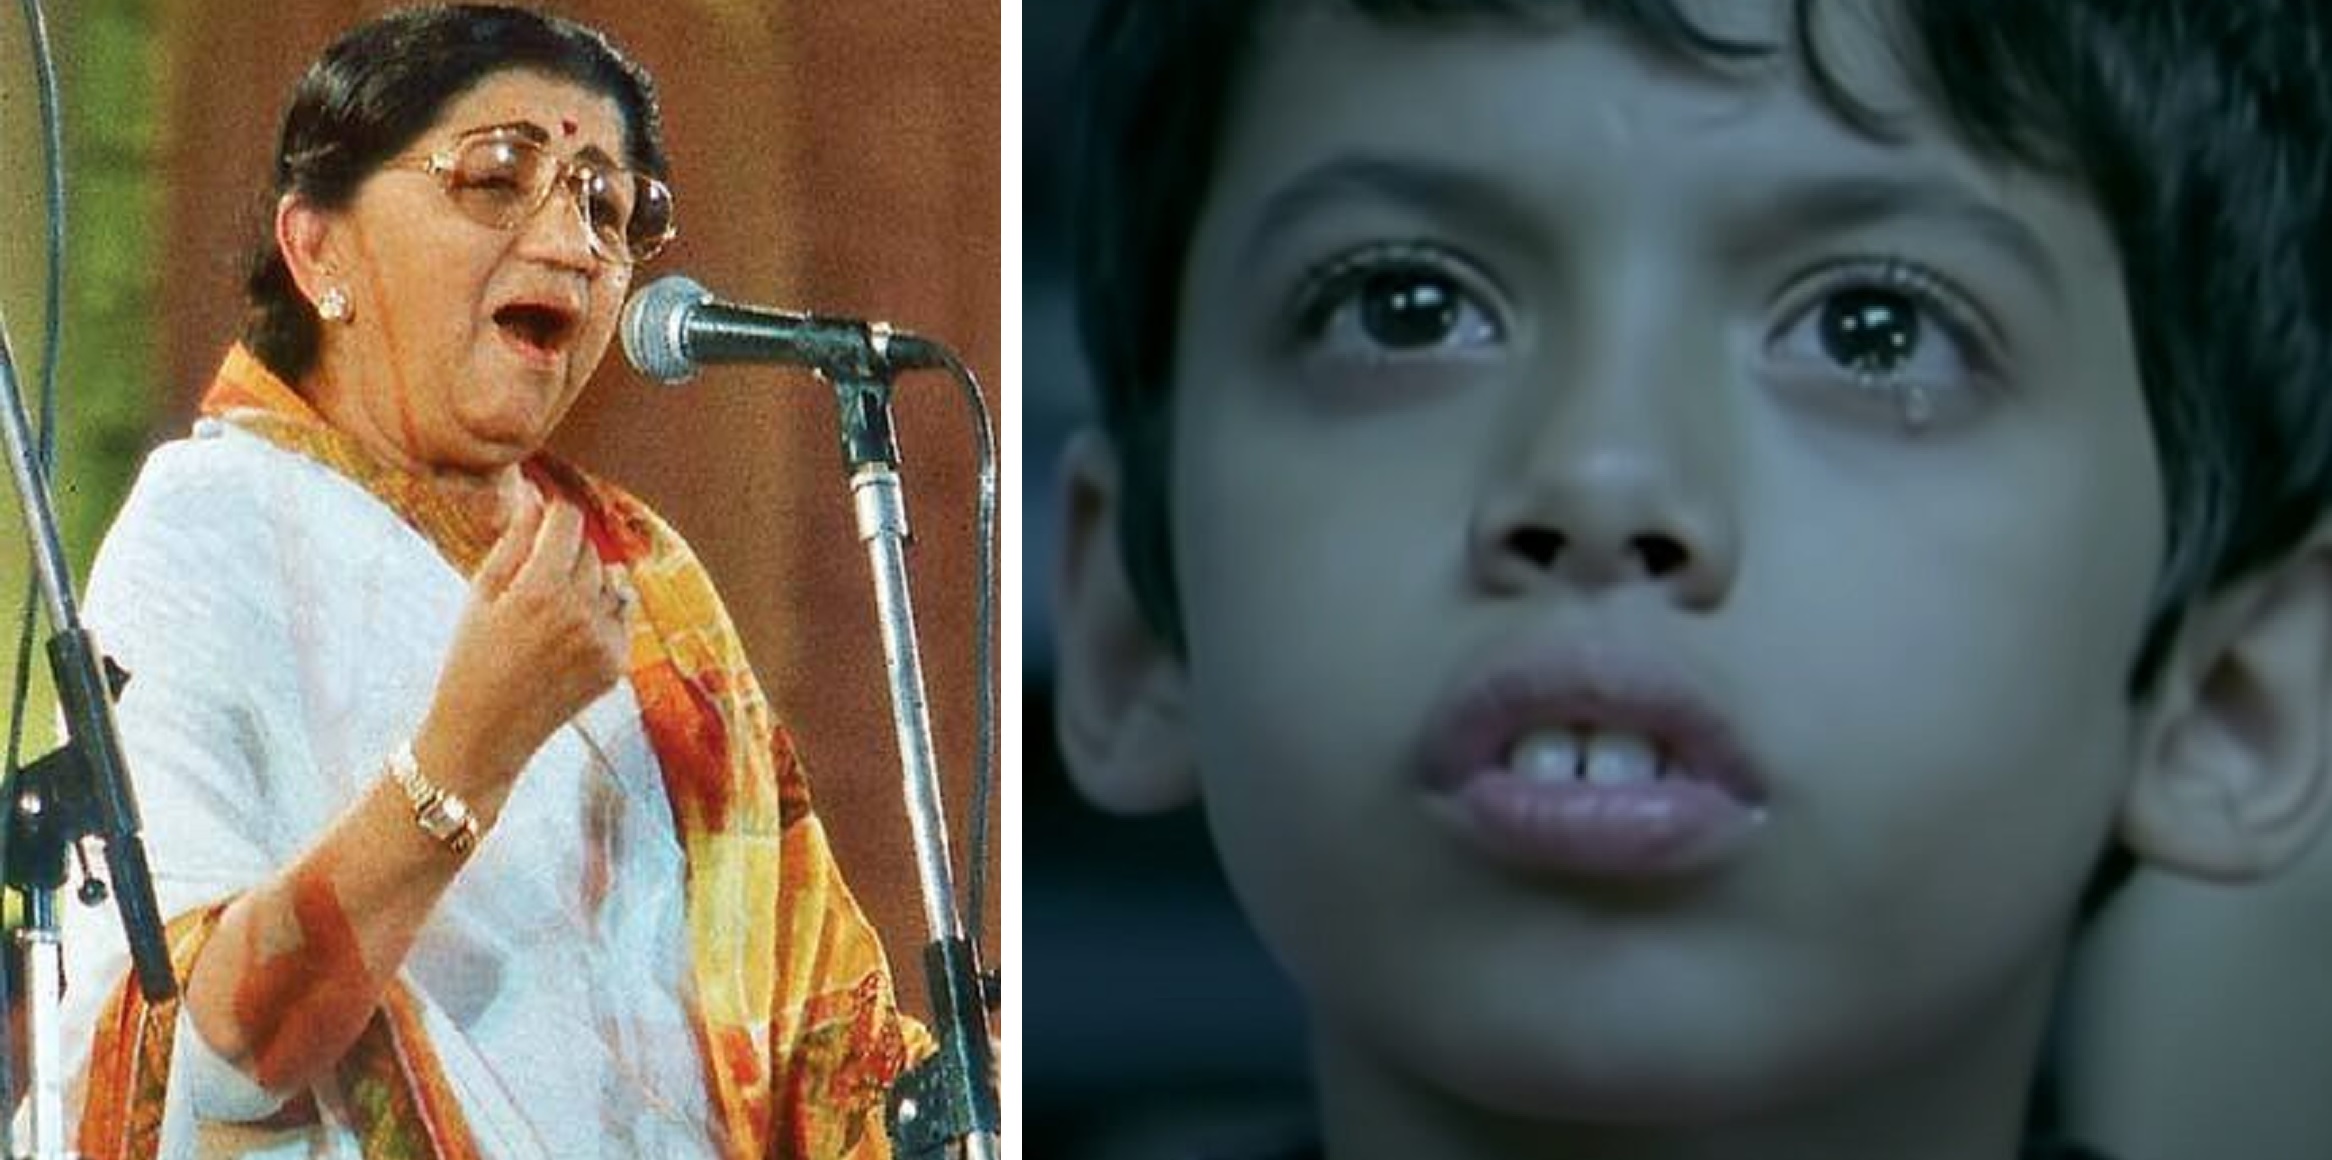 Top 20 Hindi Songs That Will Definitely Make You Cry – The Most Depressing Tracks Ever!